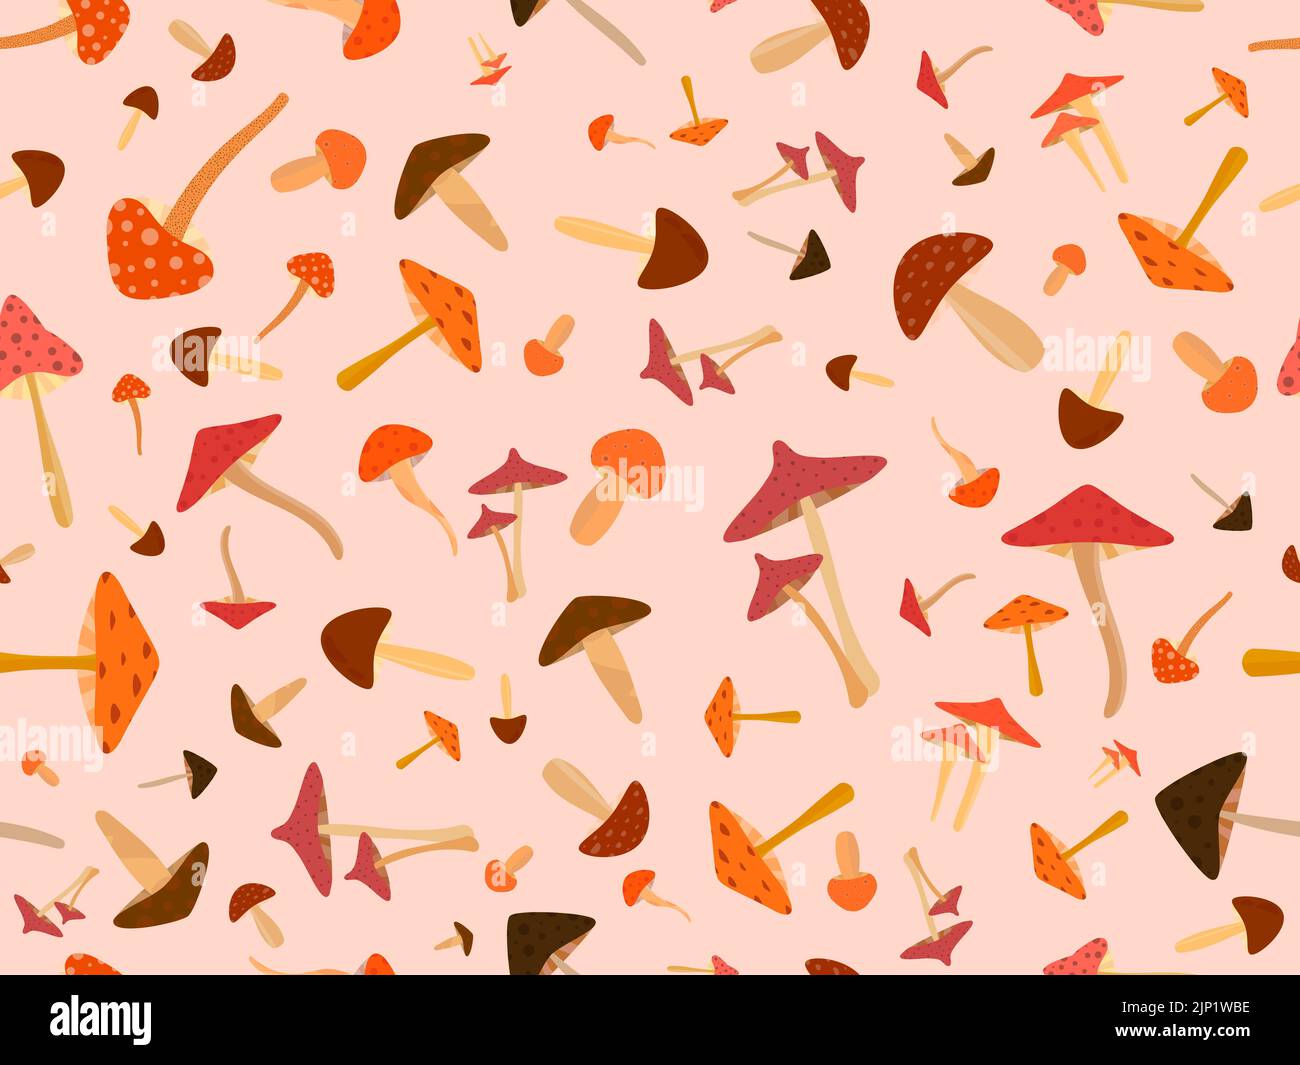 Mushrooms seamless pattern. Various mushrooms, edible and toadstools. Poisonous mushrooms and hallucinogenic fly agaric. Design for banners and promot Stock Vector